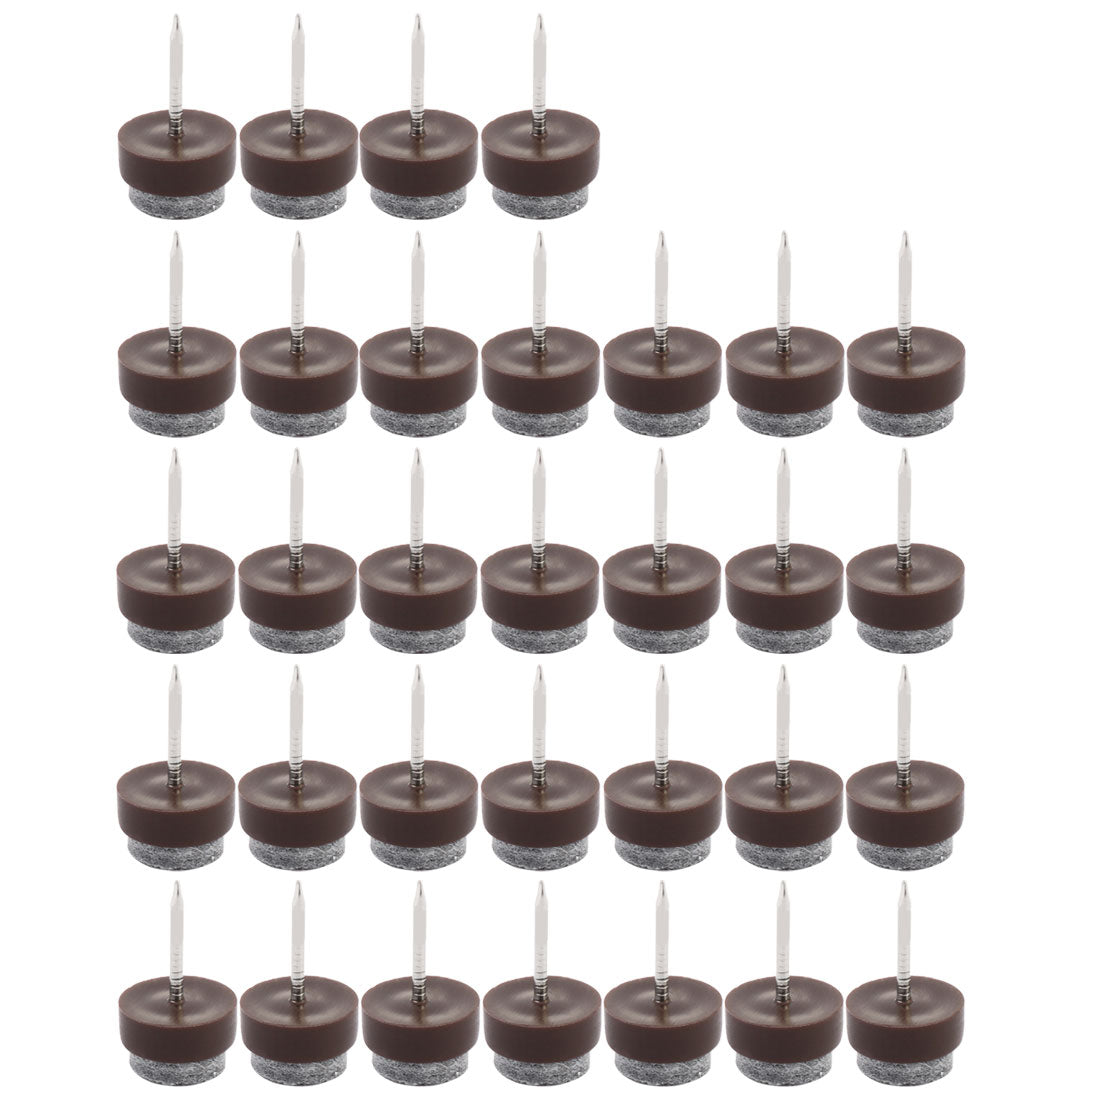 uxcell Uxcell Table Chair Furniture Feet Legs Floor Protector Guard Felt Pad Nails Dark Brown 13mm Diameter Pack of 32